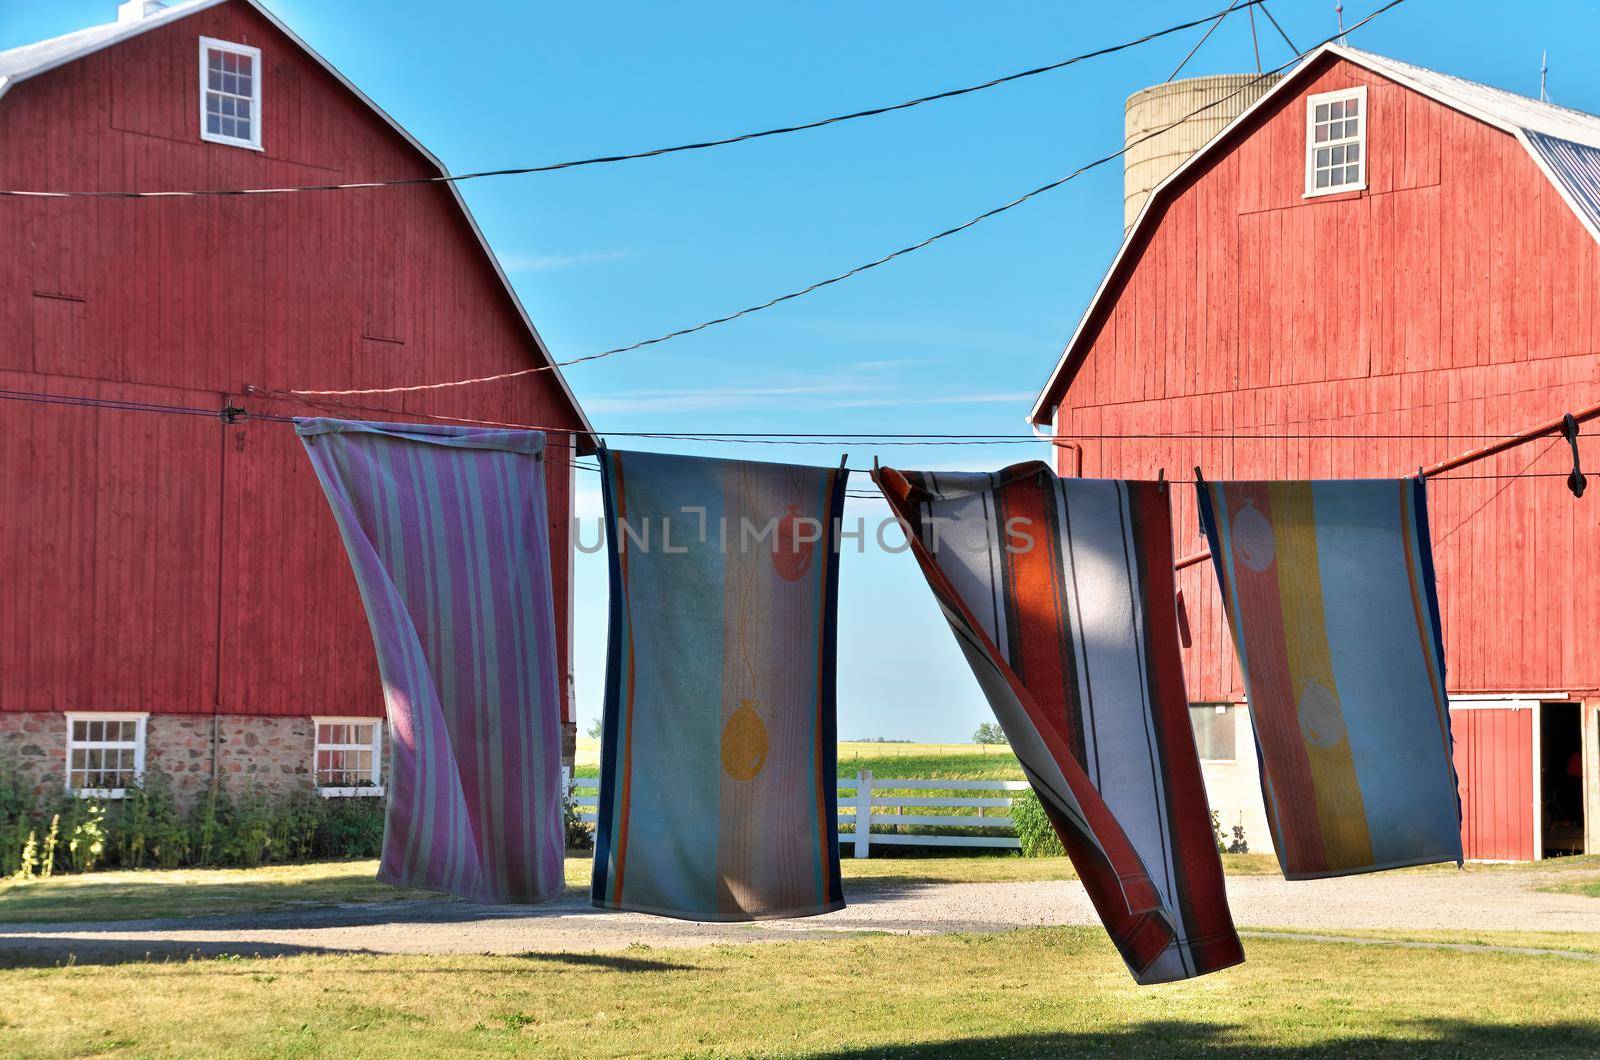 Towels Drying on a Clothesline at a Rural Farm in Ontario by markvandam